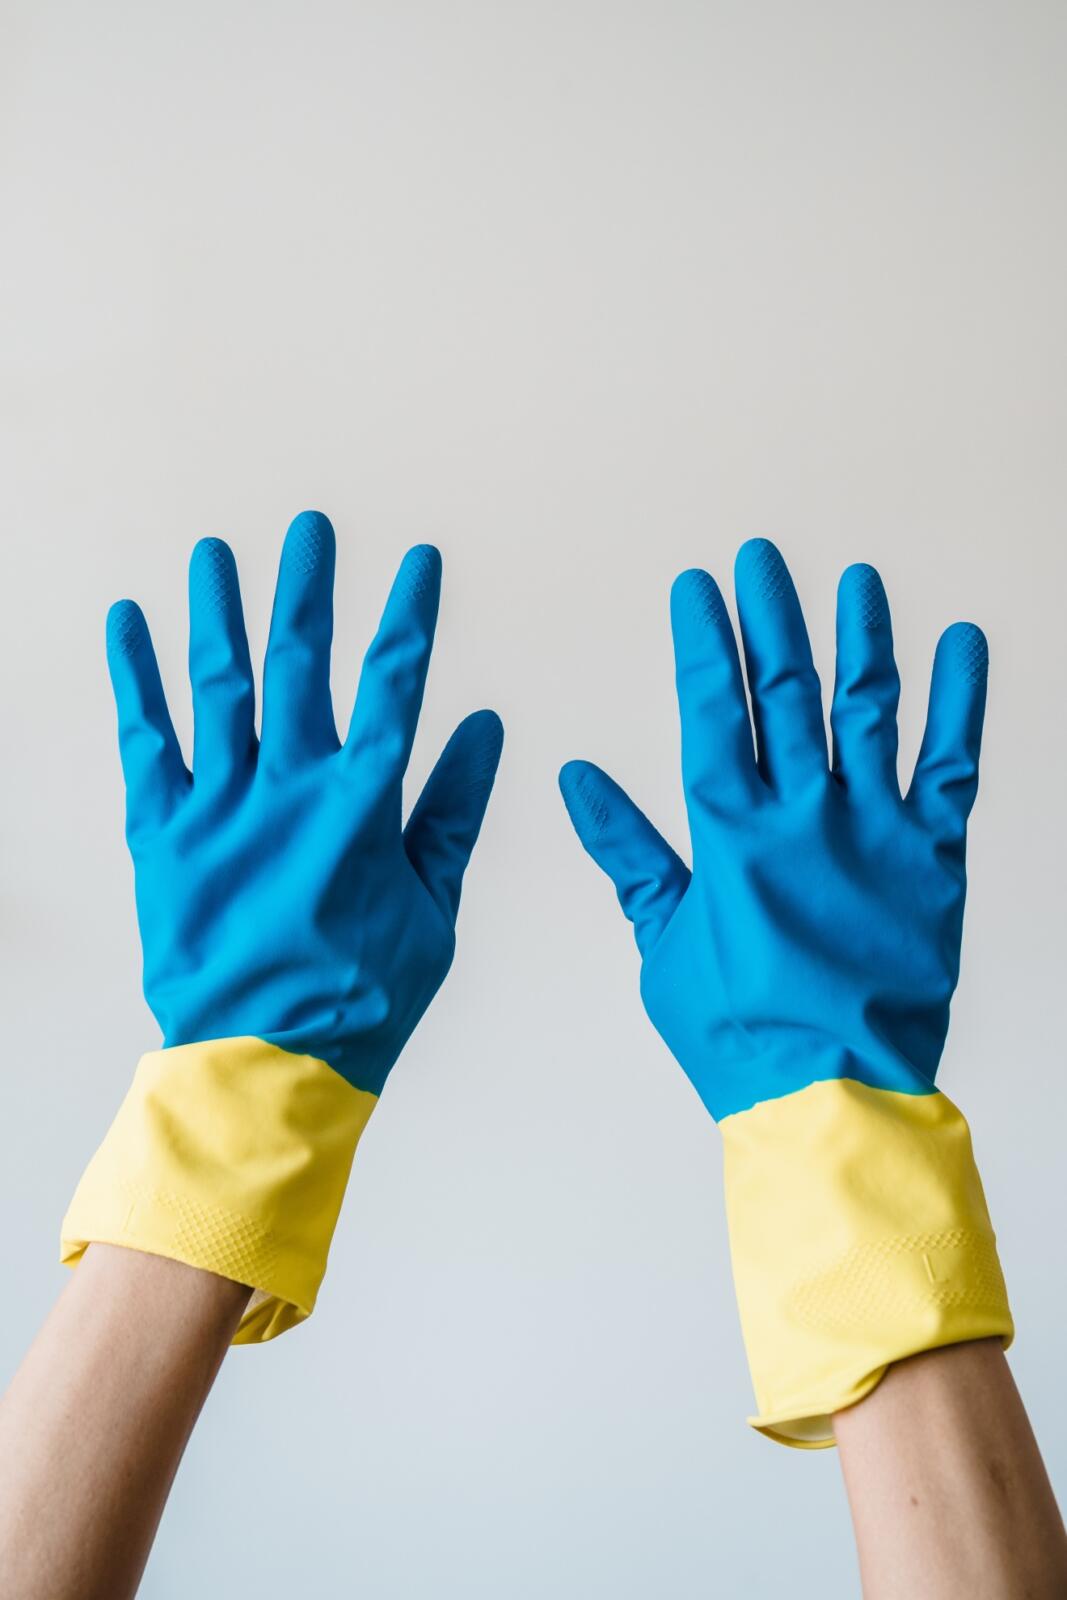 A pair of blue rubber gloves used for mold removal on a white background.